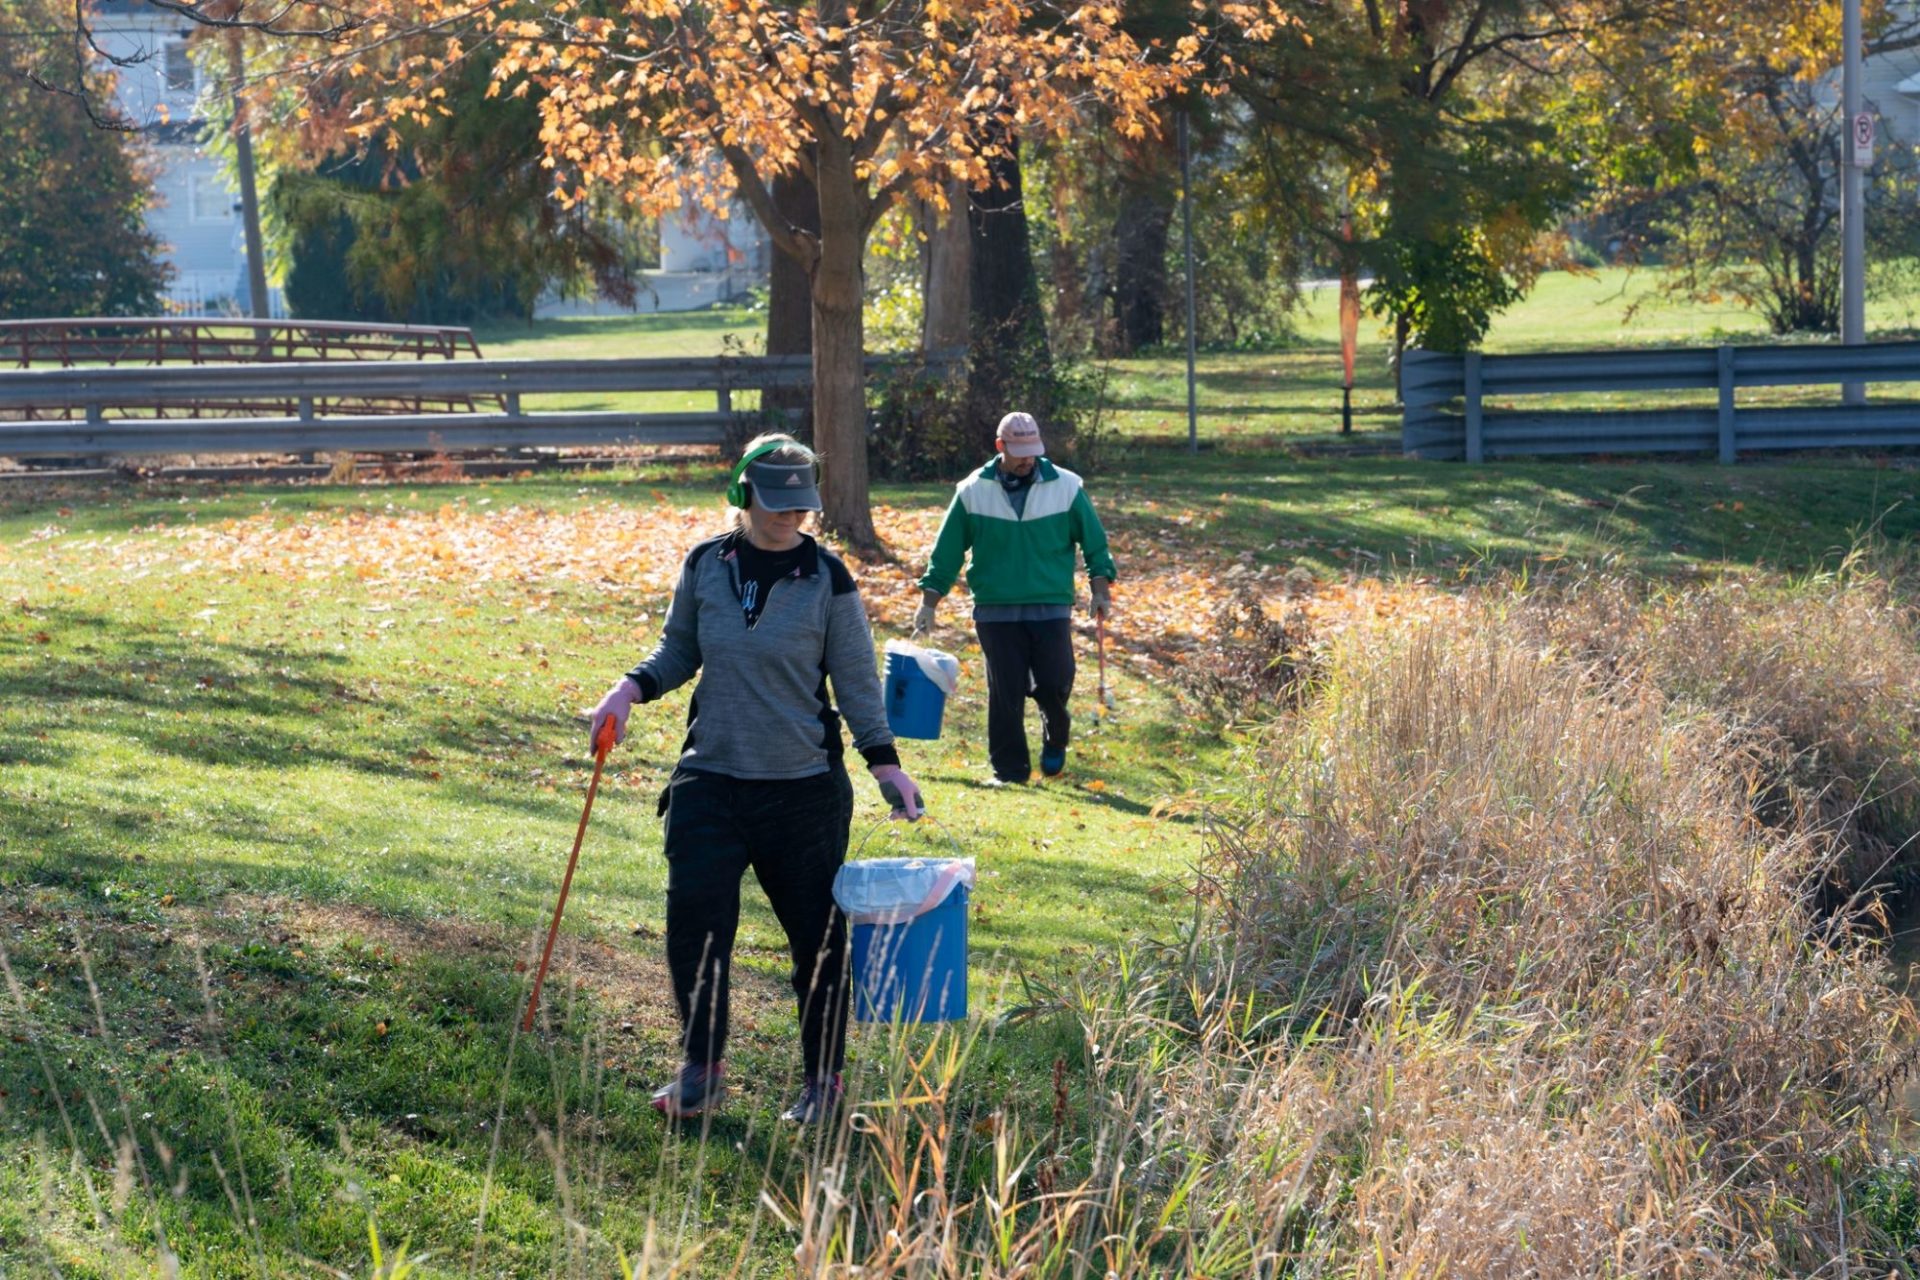 Two people walk along a creek bed carrying buckets and sticks for picking up litter.